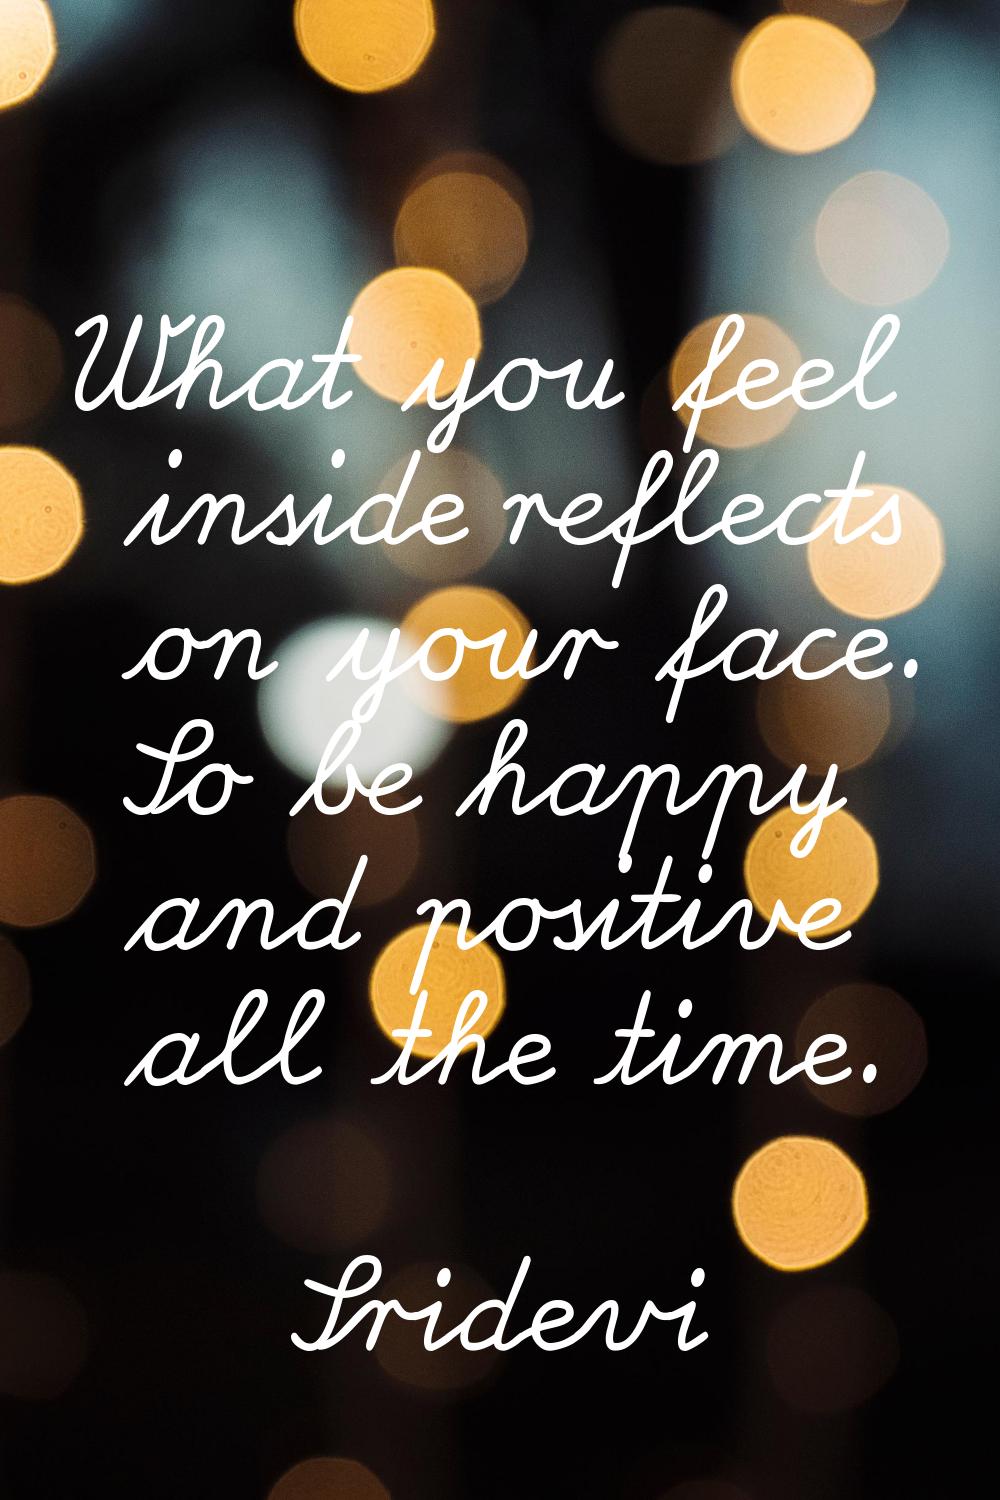 What you feel inside reflects on your face. So be happy and positive all the time.